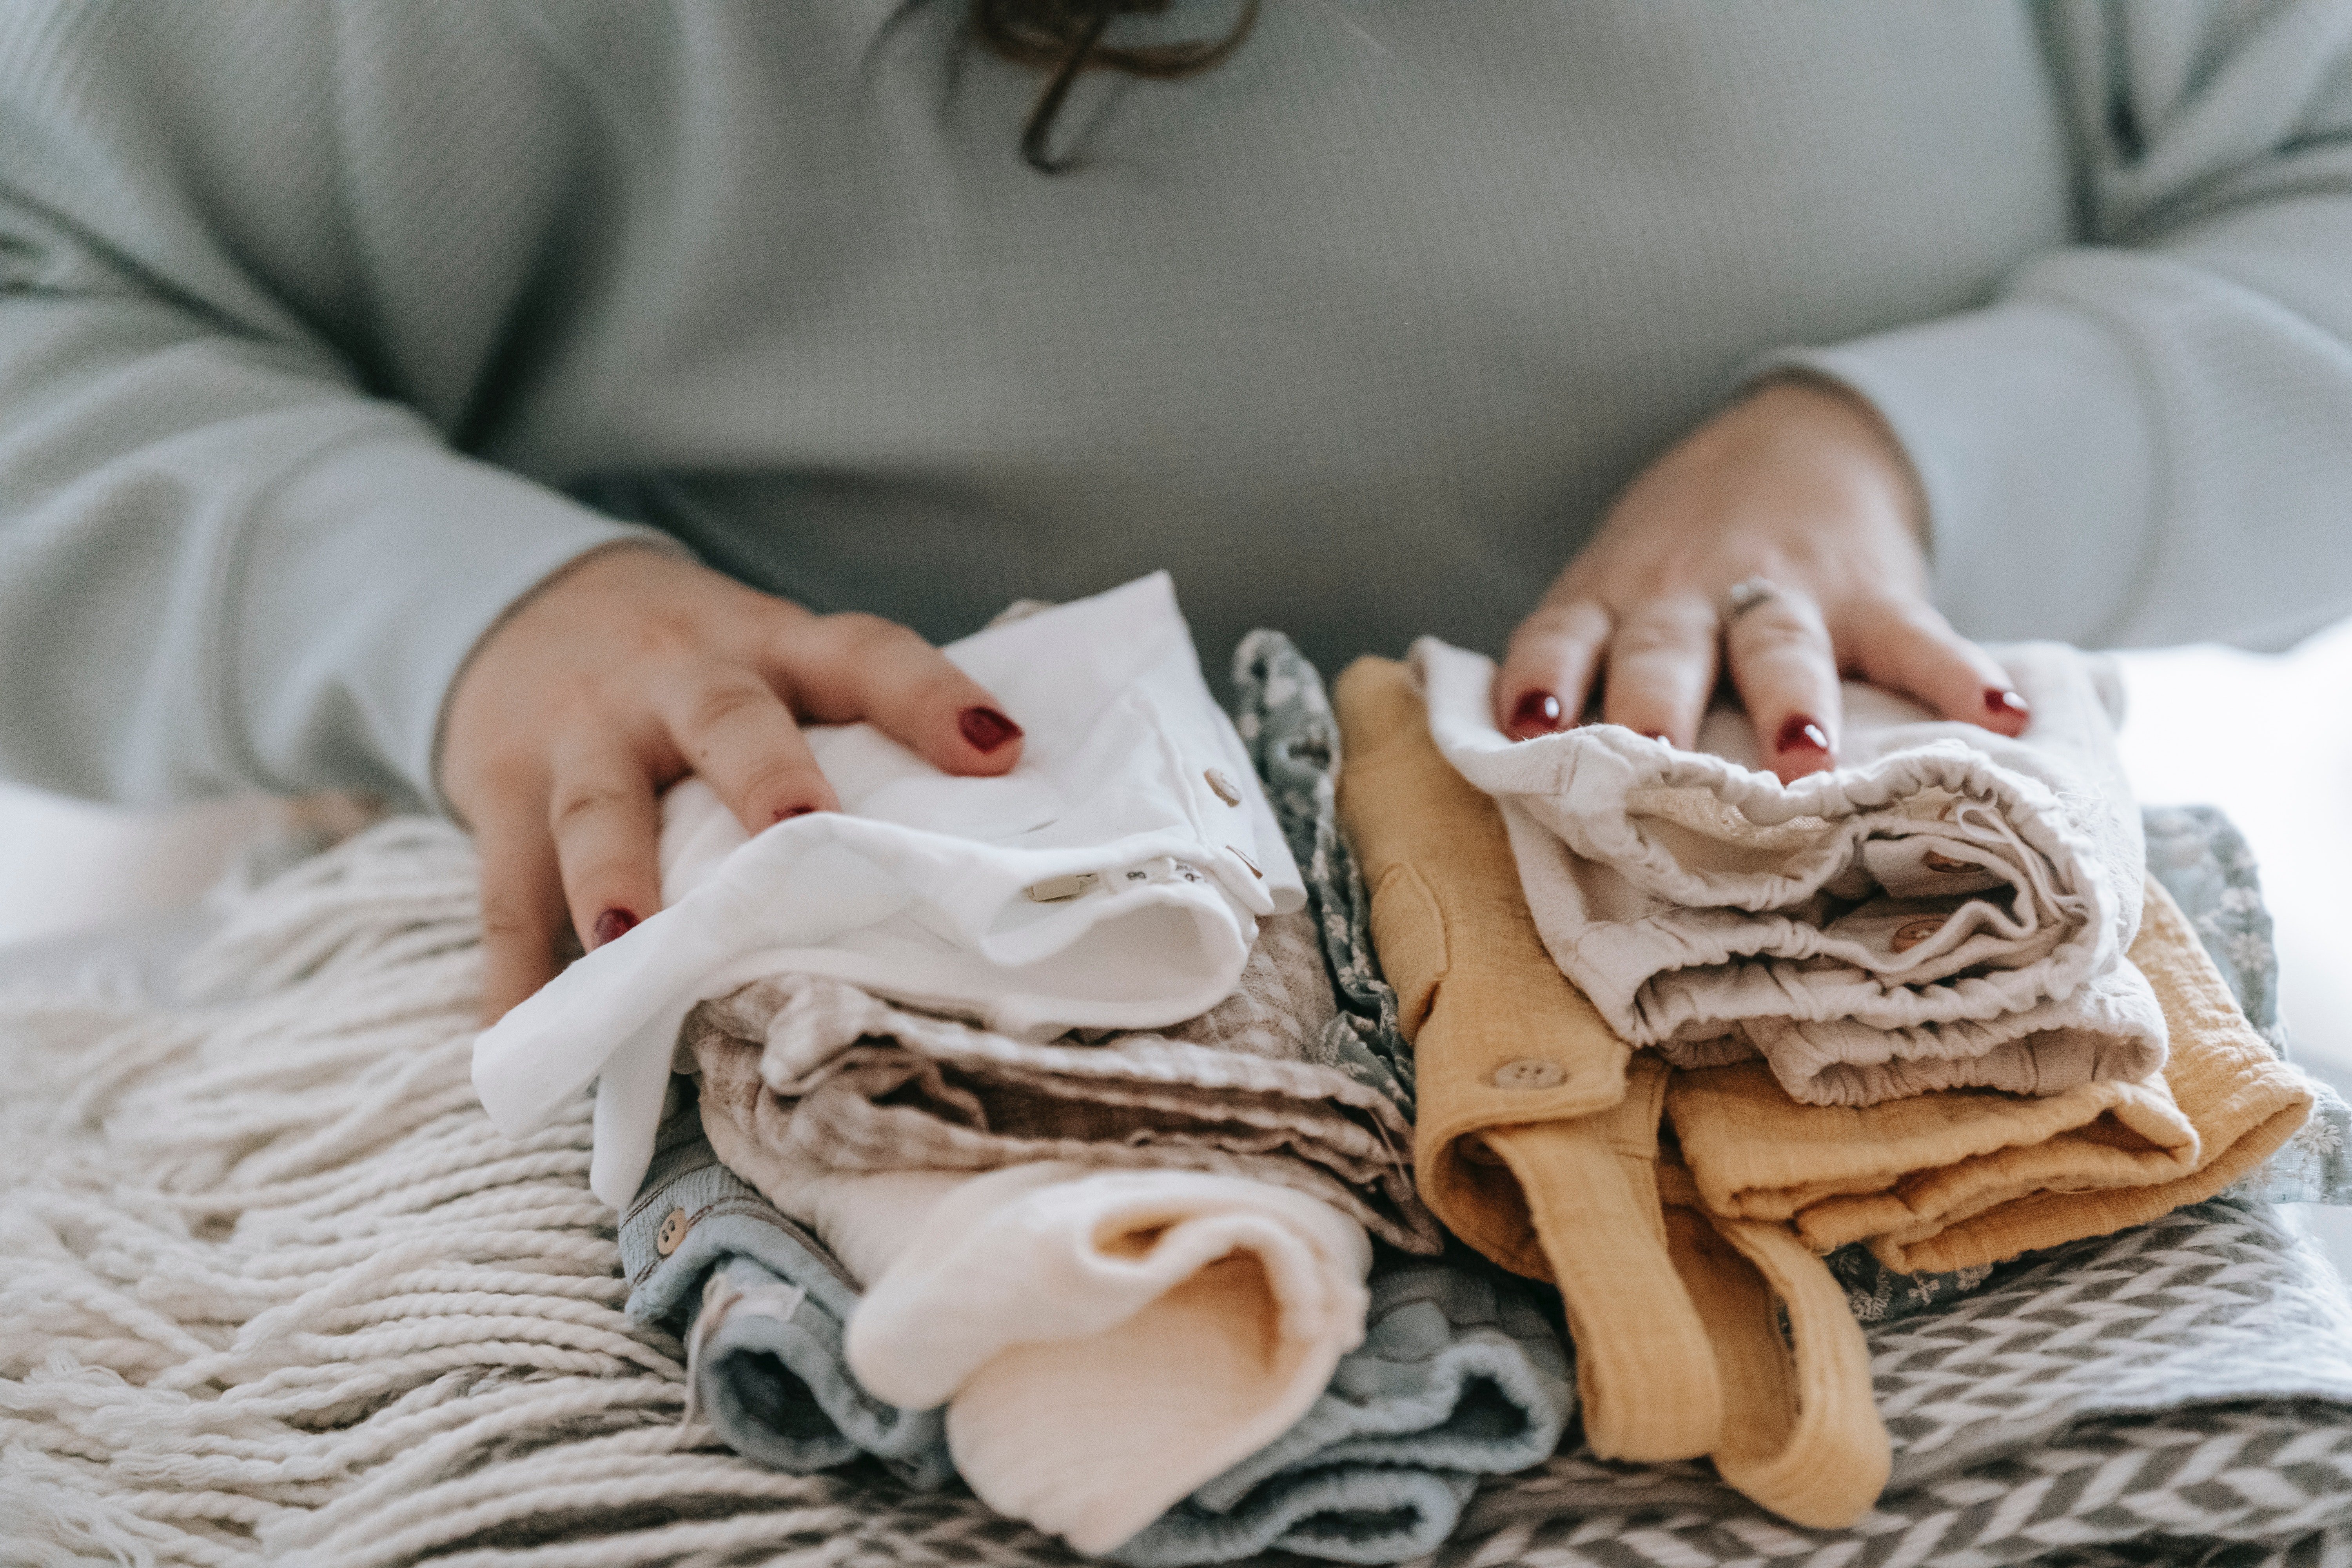 Sylvia couldn't get over her baby's loss and hid her things secretly. | Source: Pexels